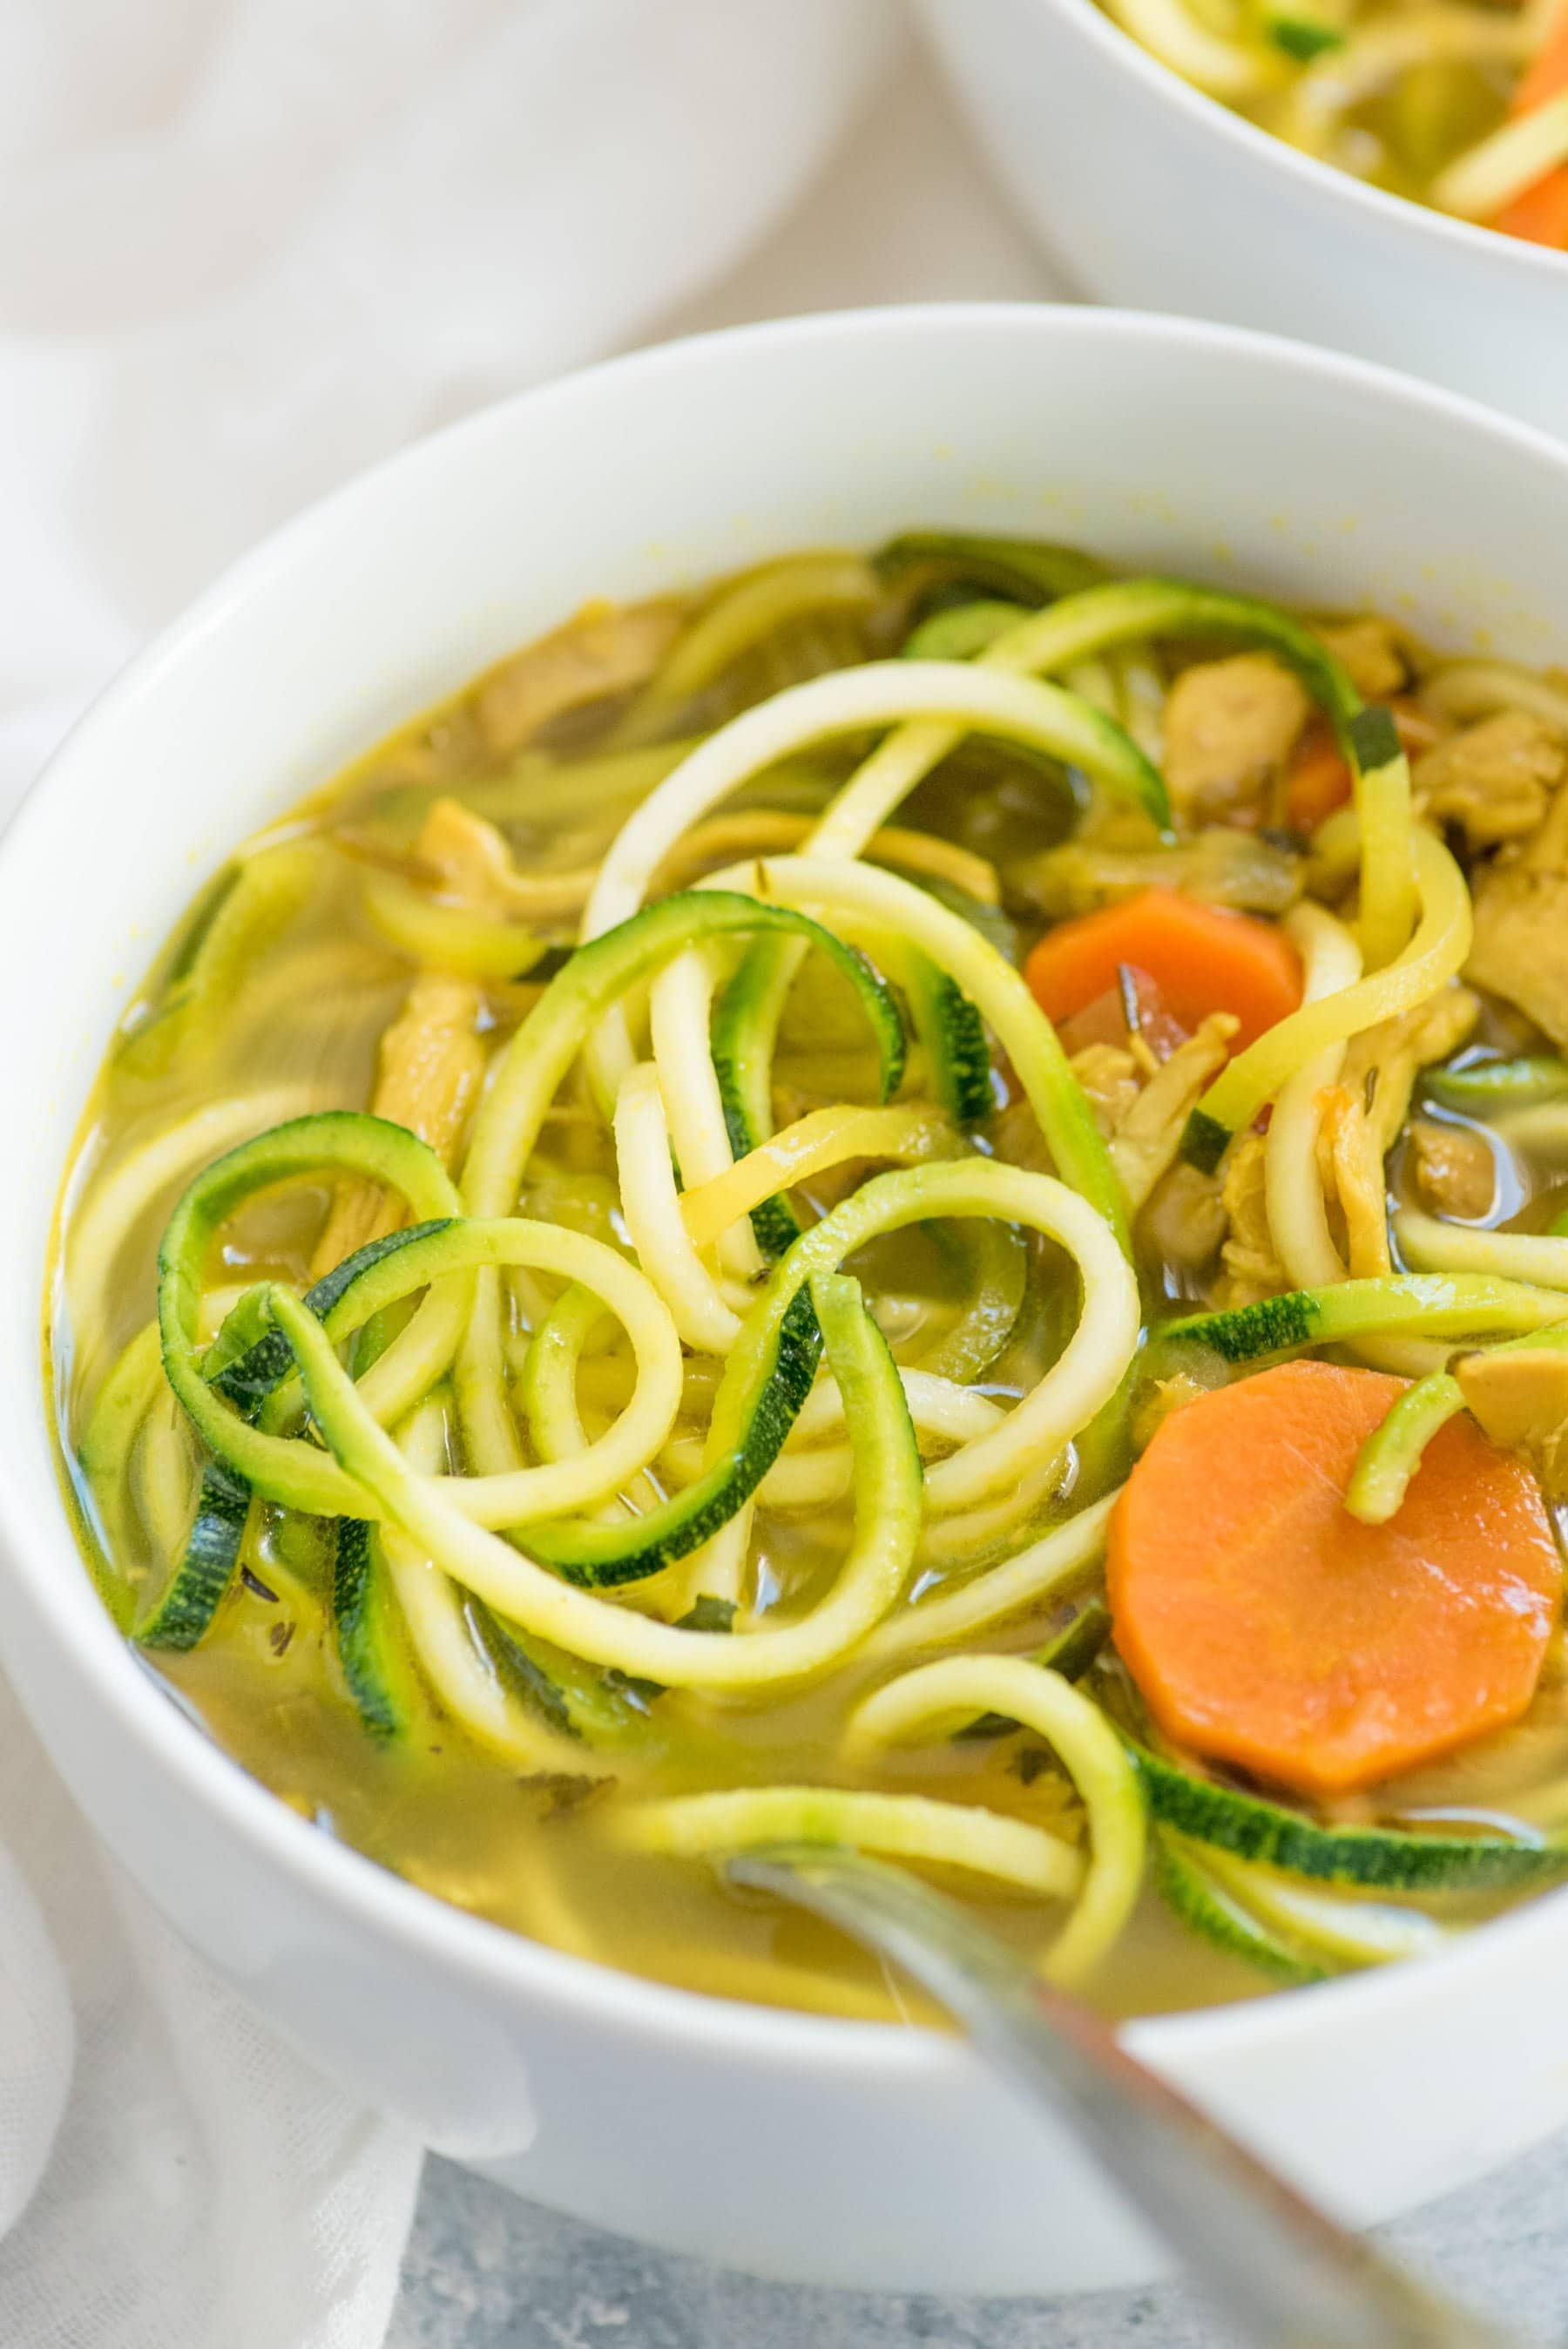 Tight view of Chicken Zoodle Soup in a while bowl with a spoon in the soup. Zucchini noodles and carrot slices are floating in a rich bone broth.